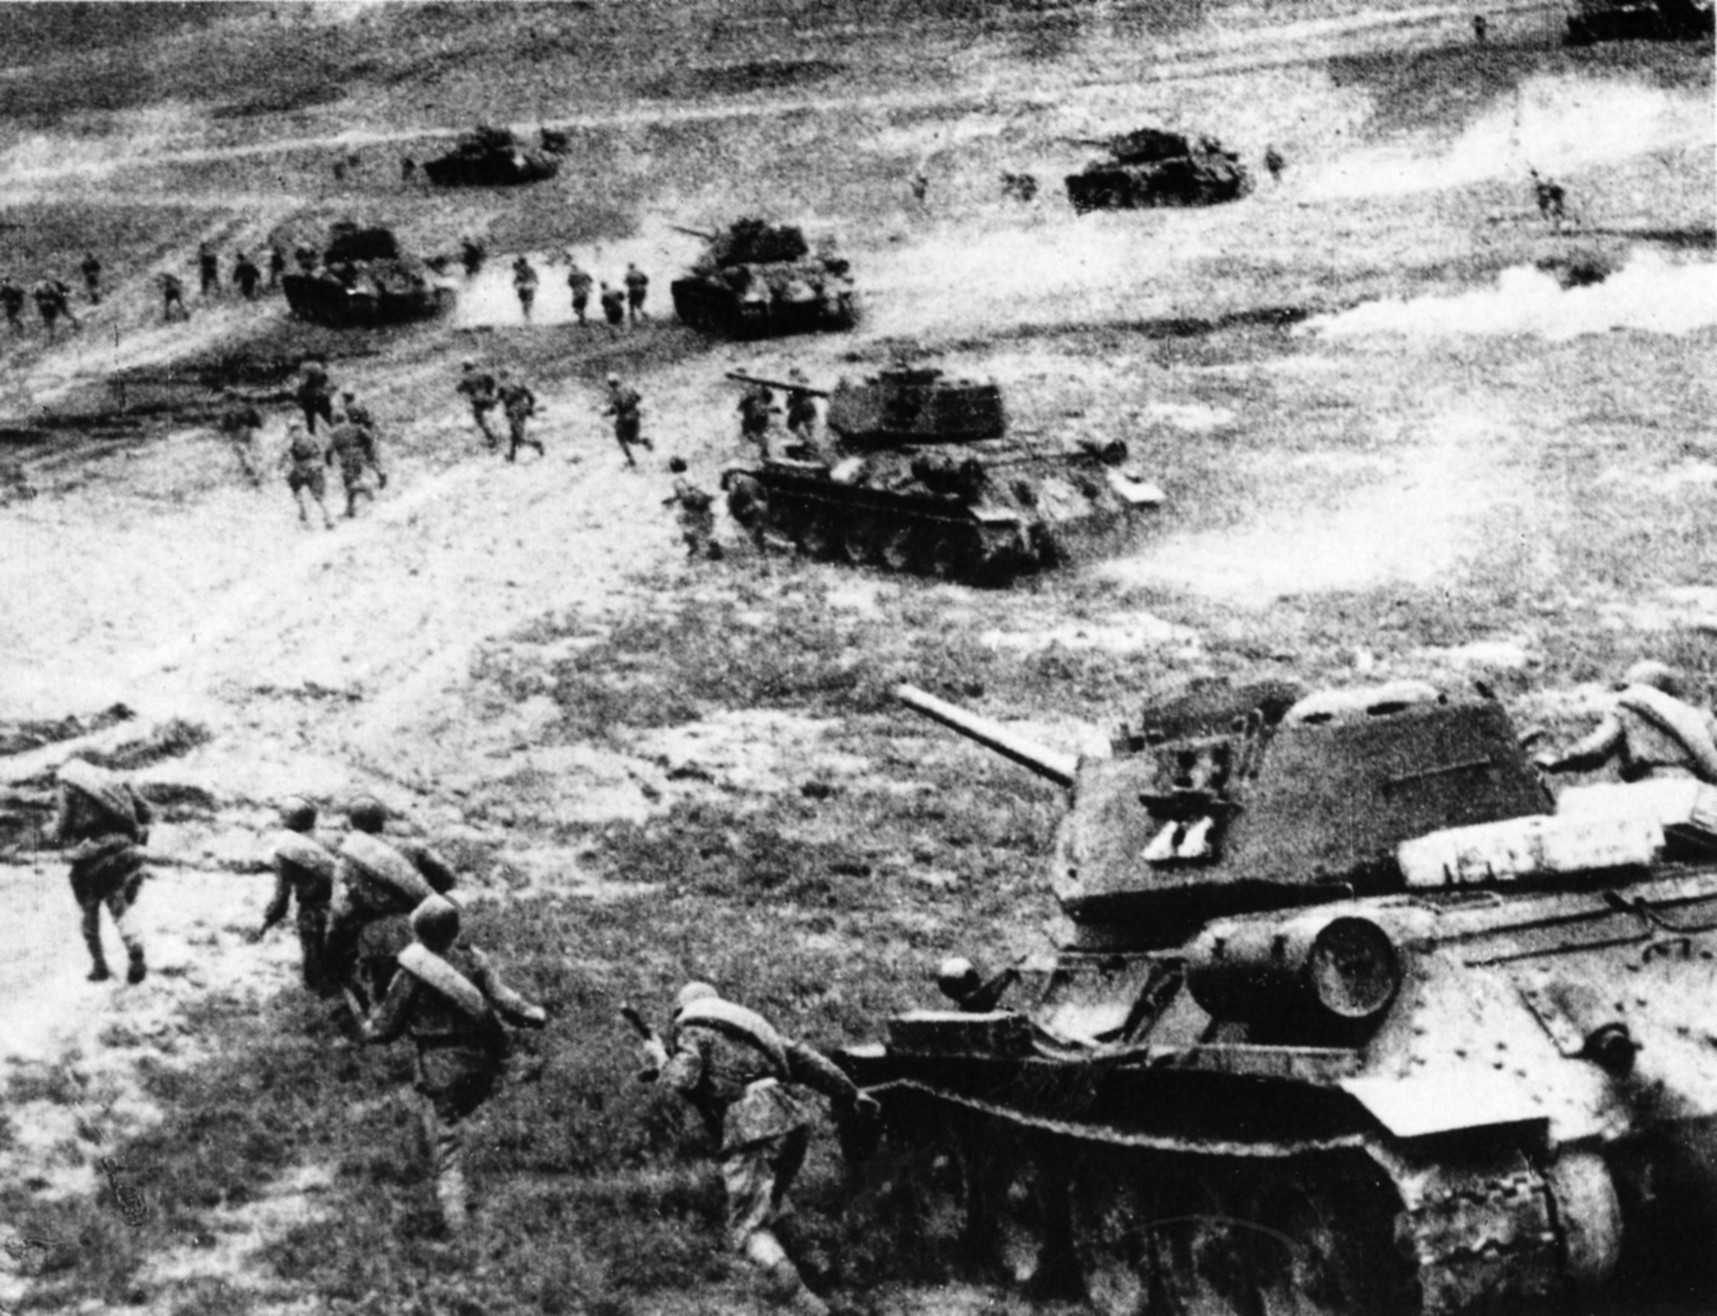 Soviet T-34 tanks, supported by thousands of Red Army soldiers, advance rapidly during a counter-attack at Kursk. The resurgent Soviet military managed to contain the German offensive and later undertake its drive on Berlin.